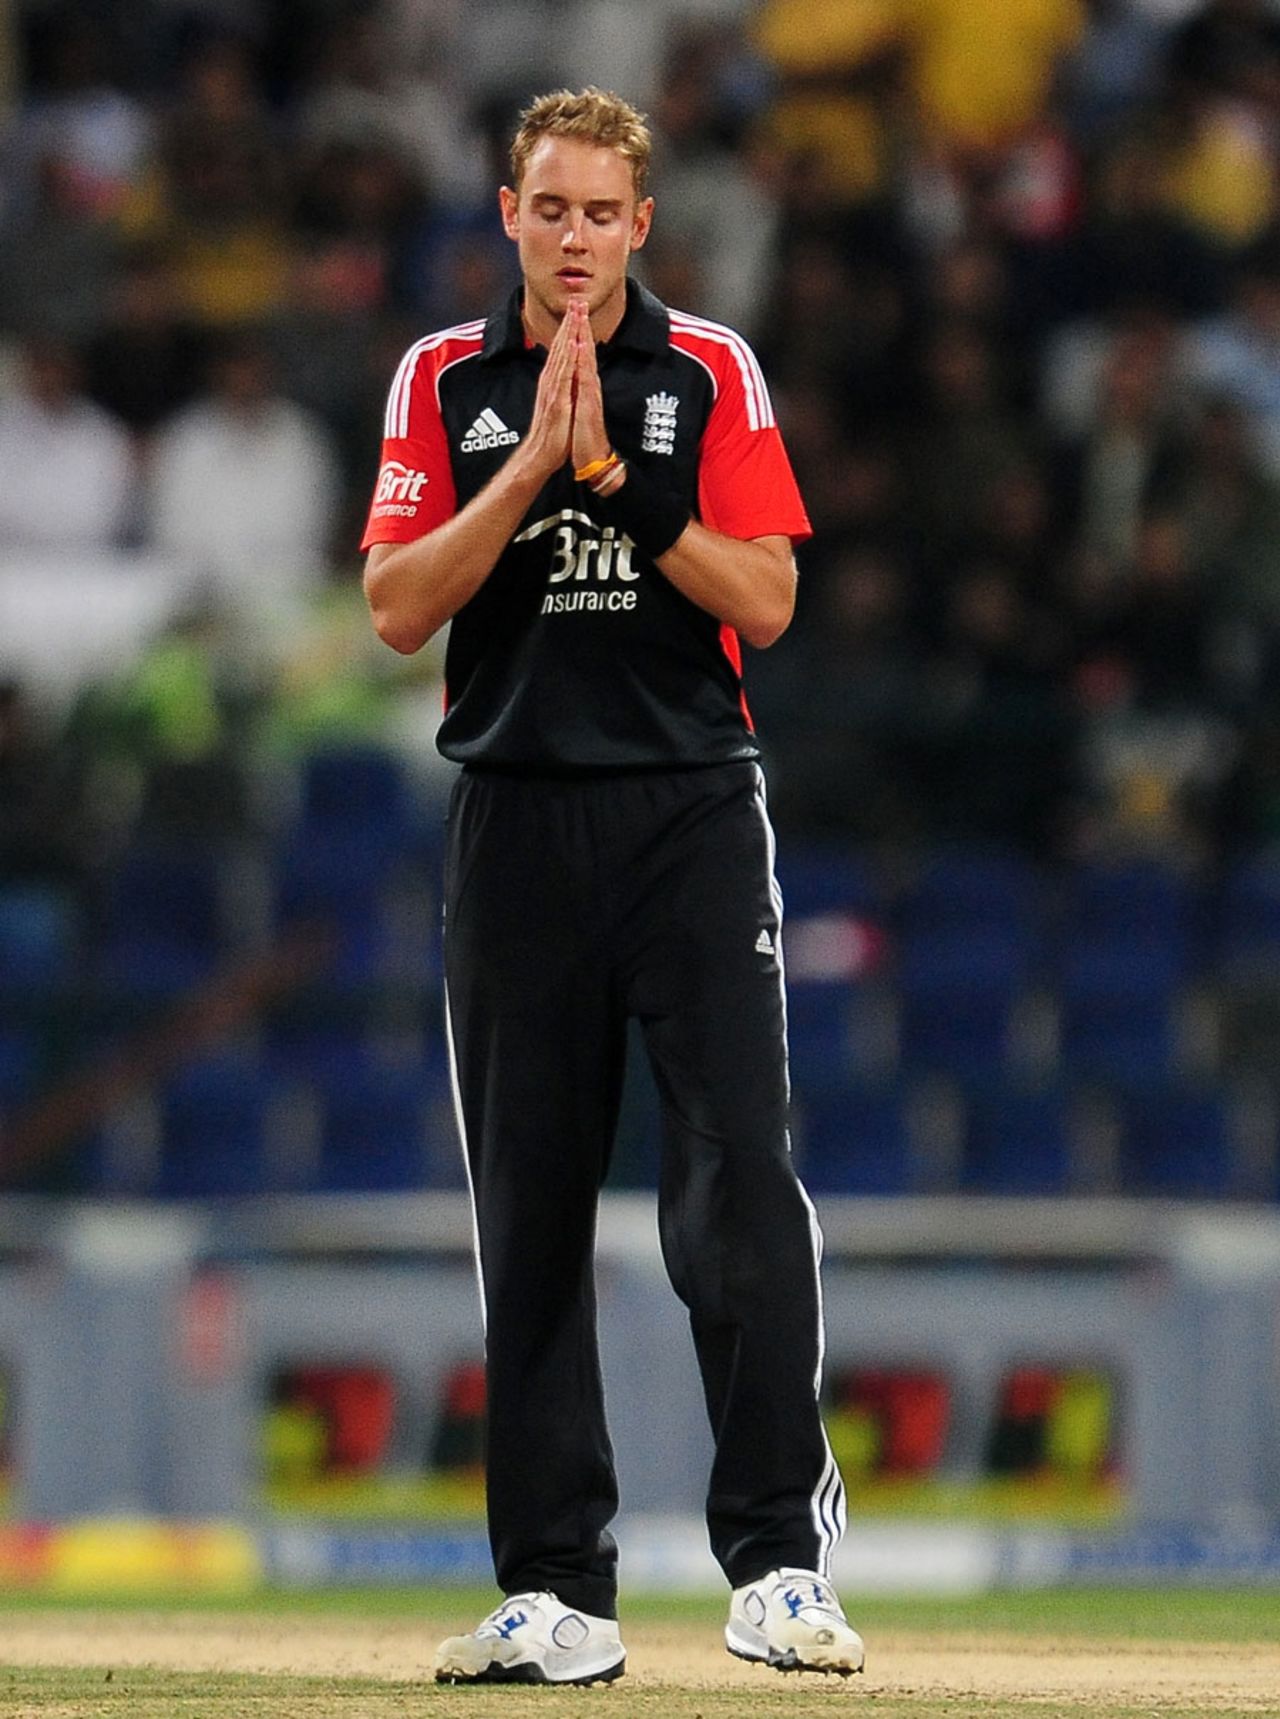 Stuart Broad sought divine intervention in the closing stages, Pakistan v England, 3rd Twenty20, Abu Dhabi, February 27, 2012